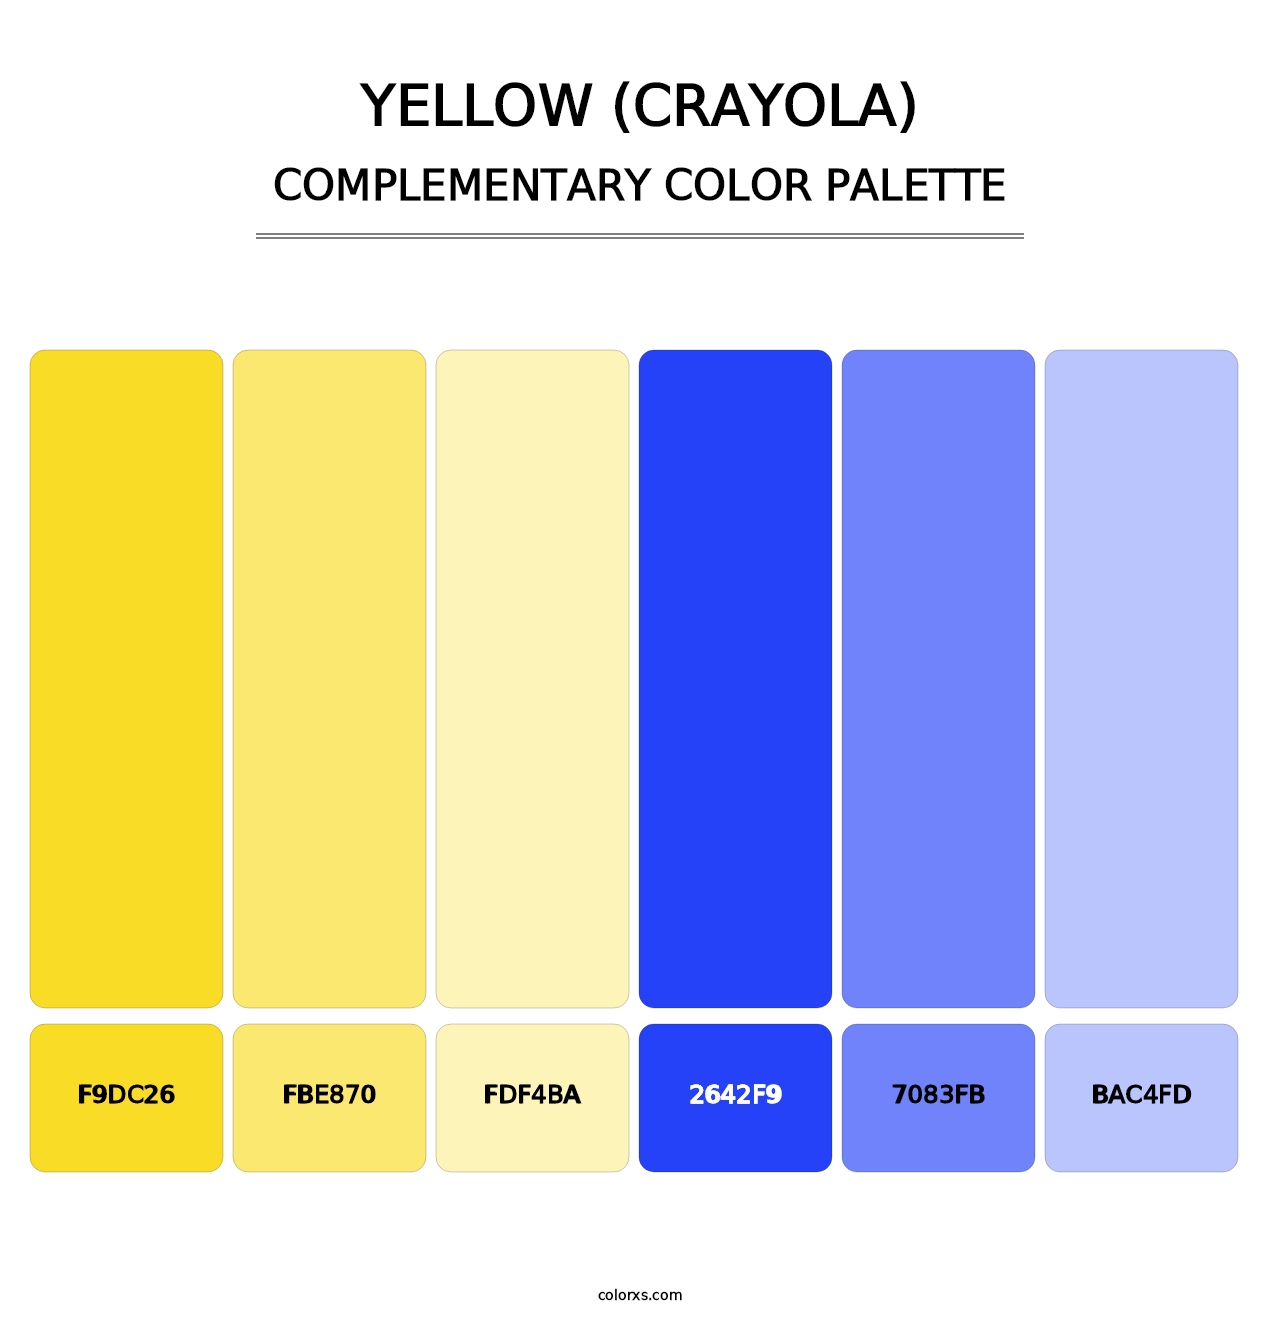 Yellow (Crayola) - Complementary Color Palette